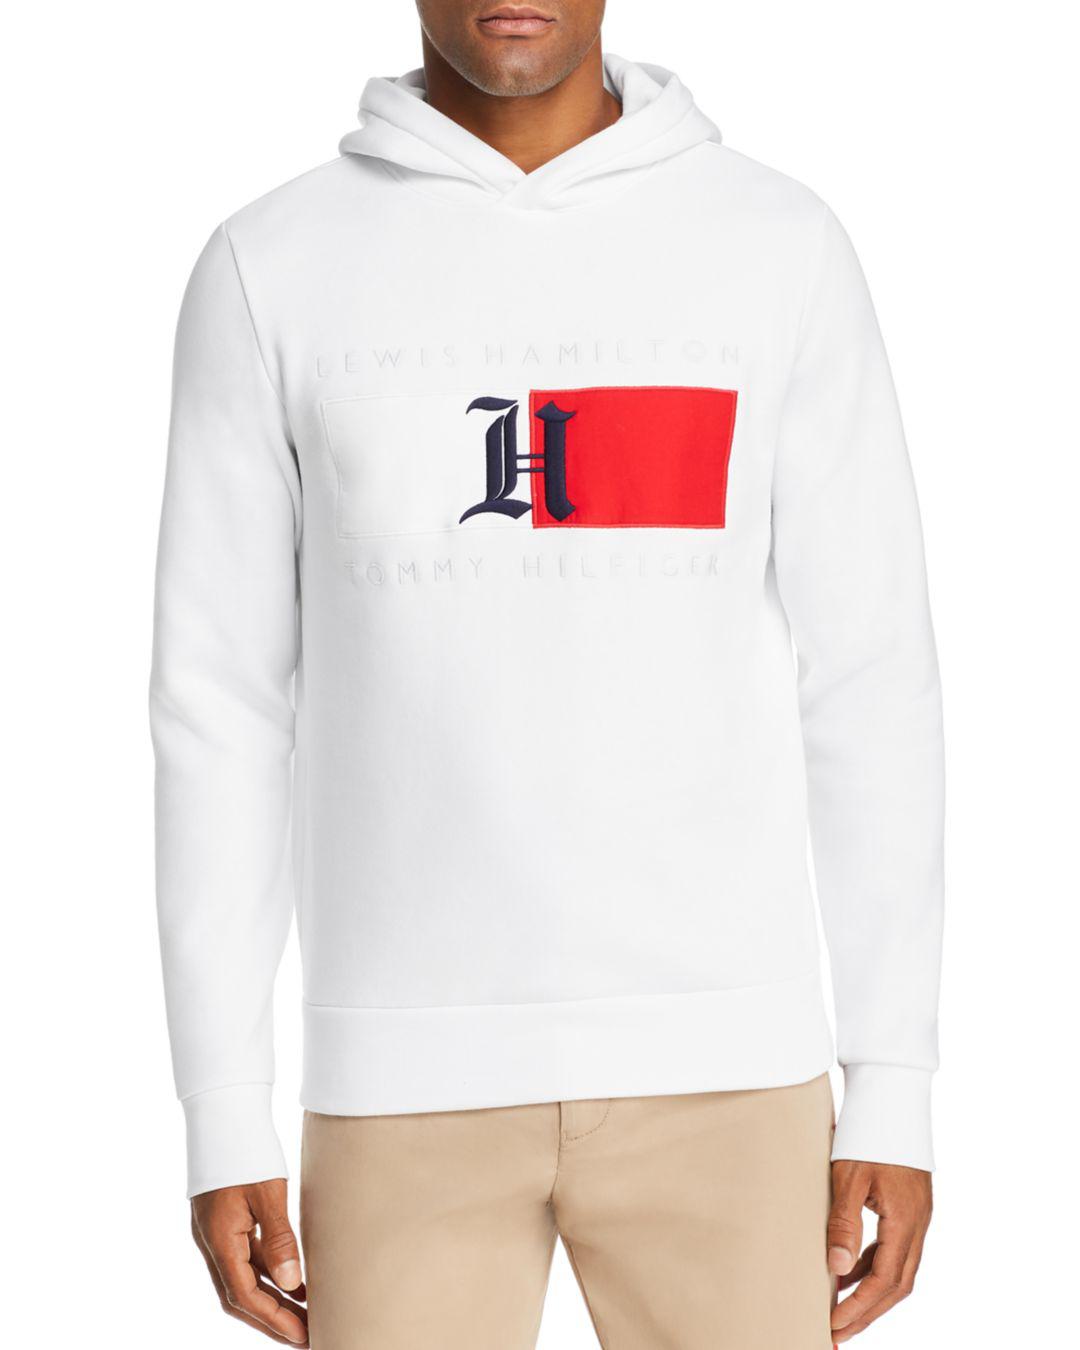 Tommy Hilfiger X Lewis Hamilton Flag Hooded Sweatshirt in Bright White  (White) for Men - Lyst